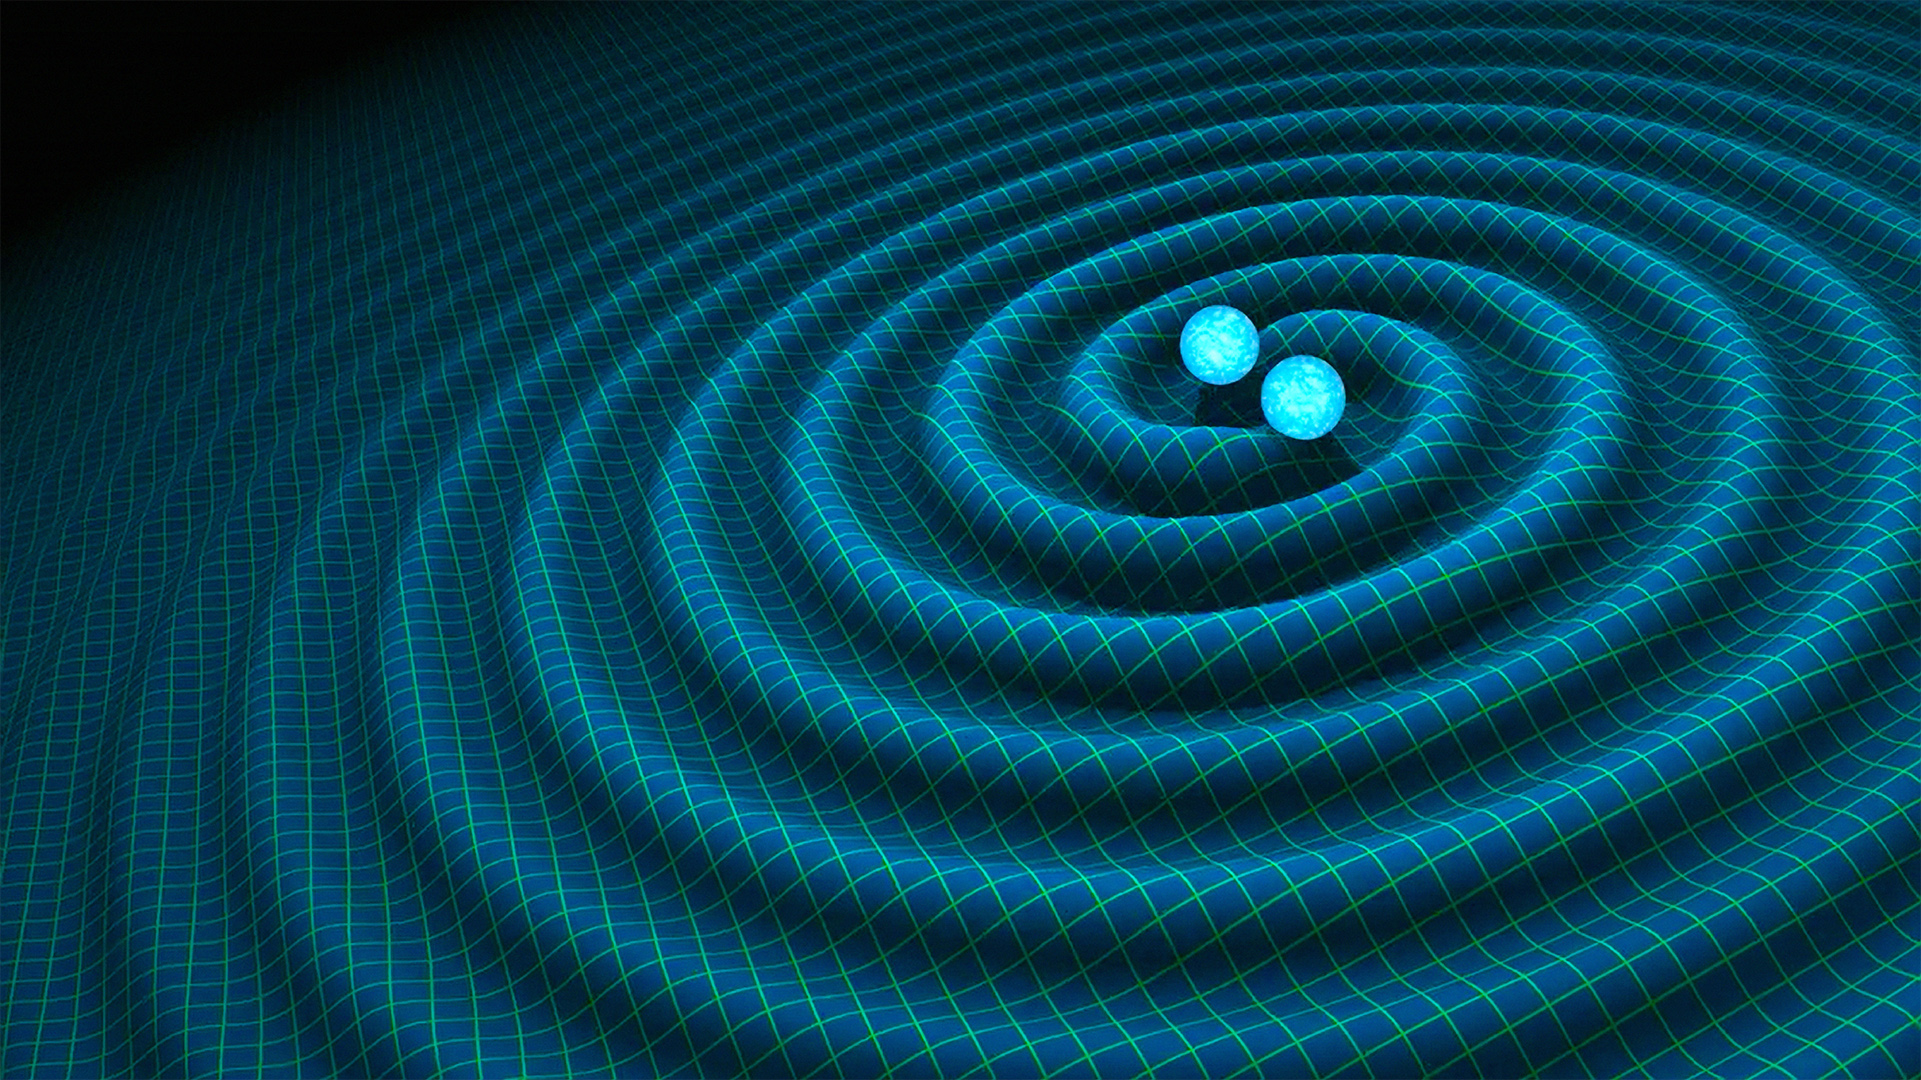 Gravitational waves indicate the existence of a previously unprecedented object